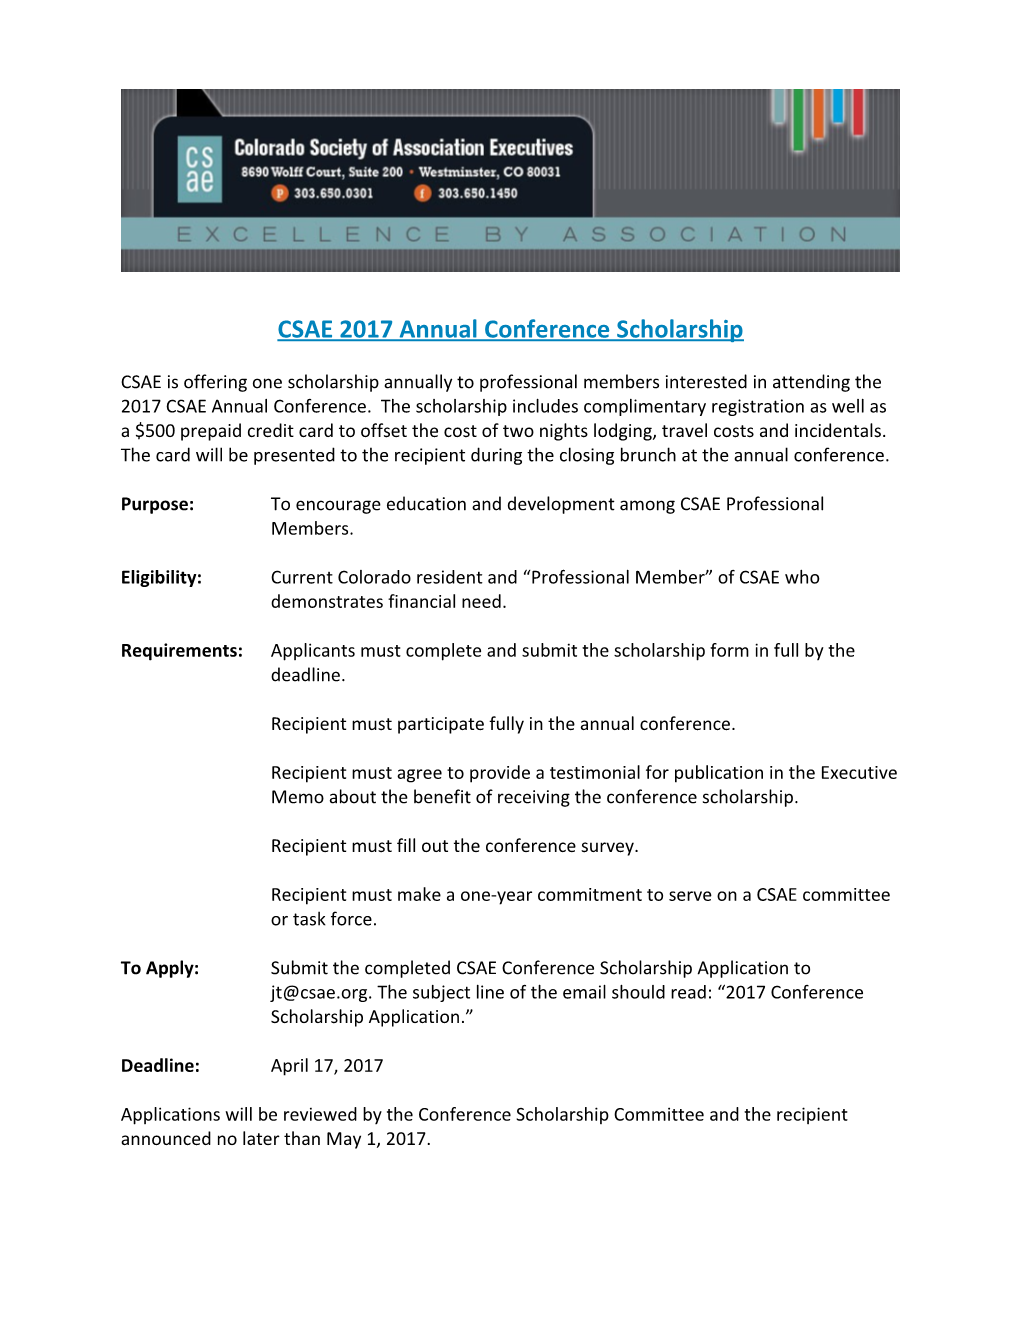 CSAE 2017Annual Conference Scholarship